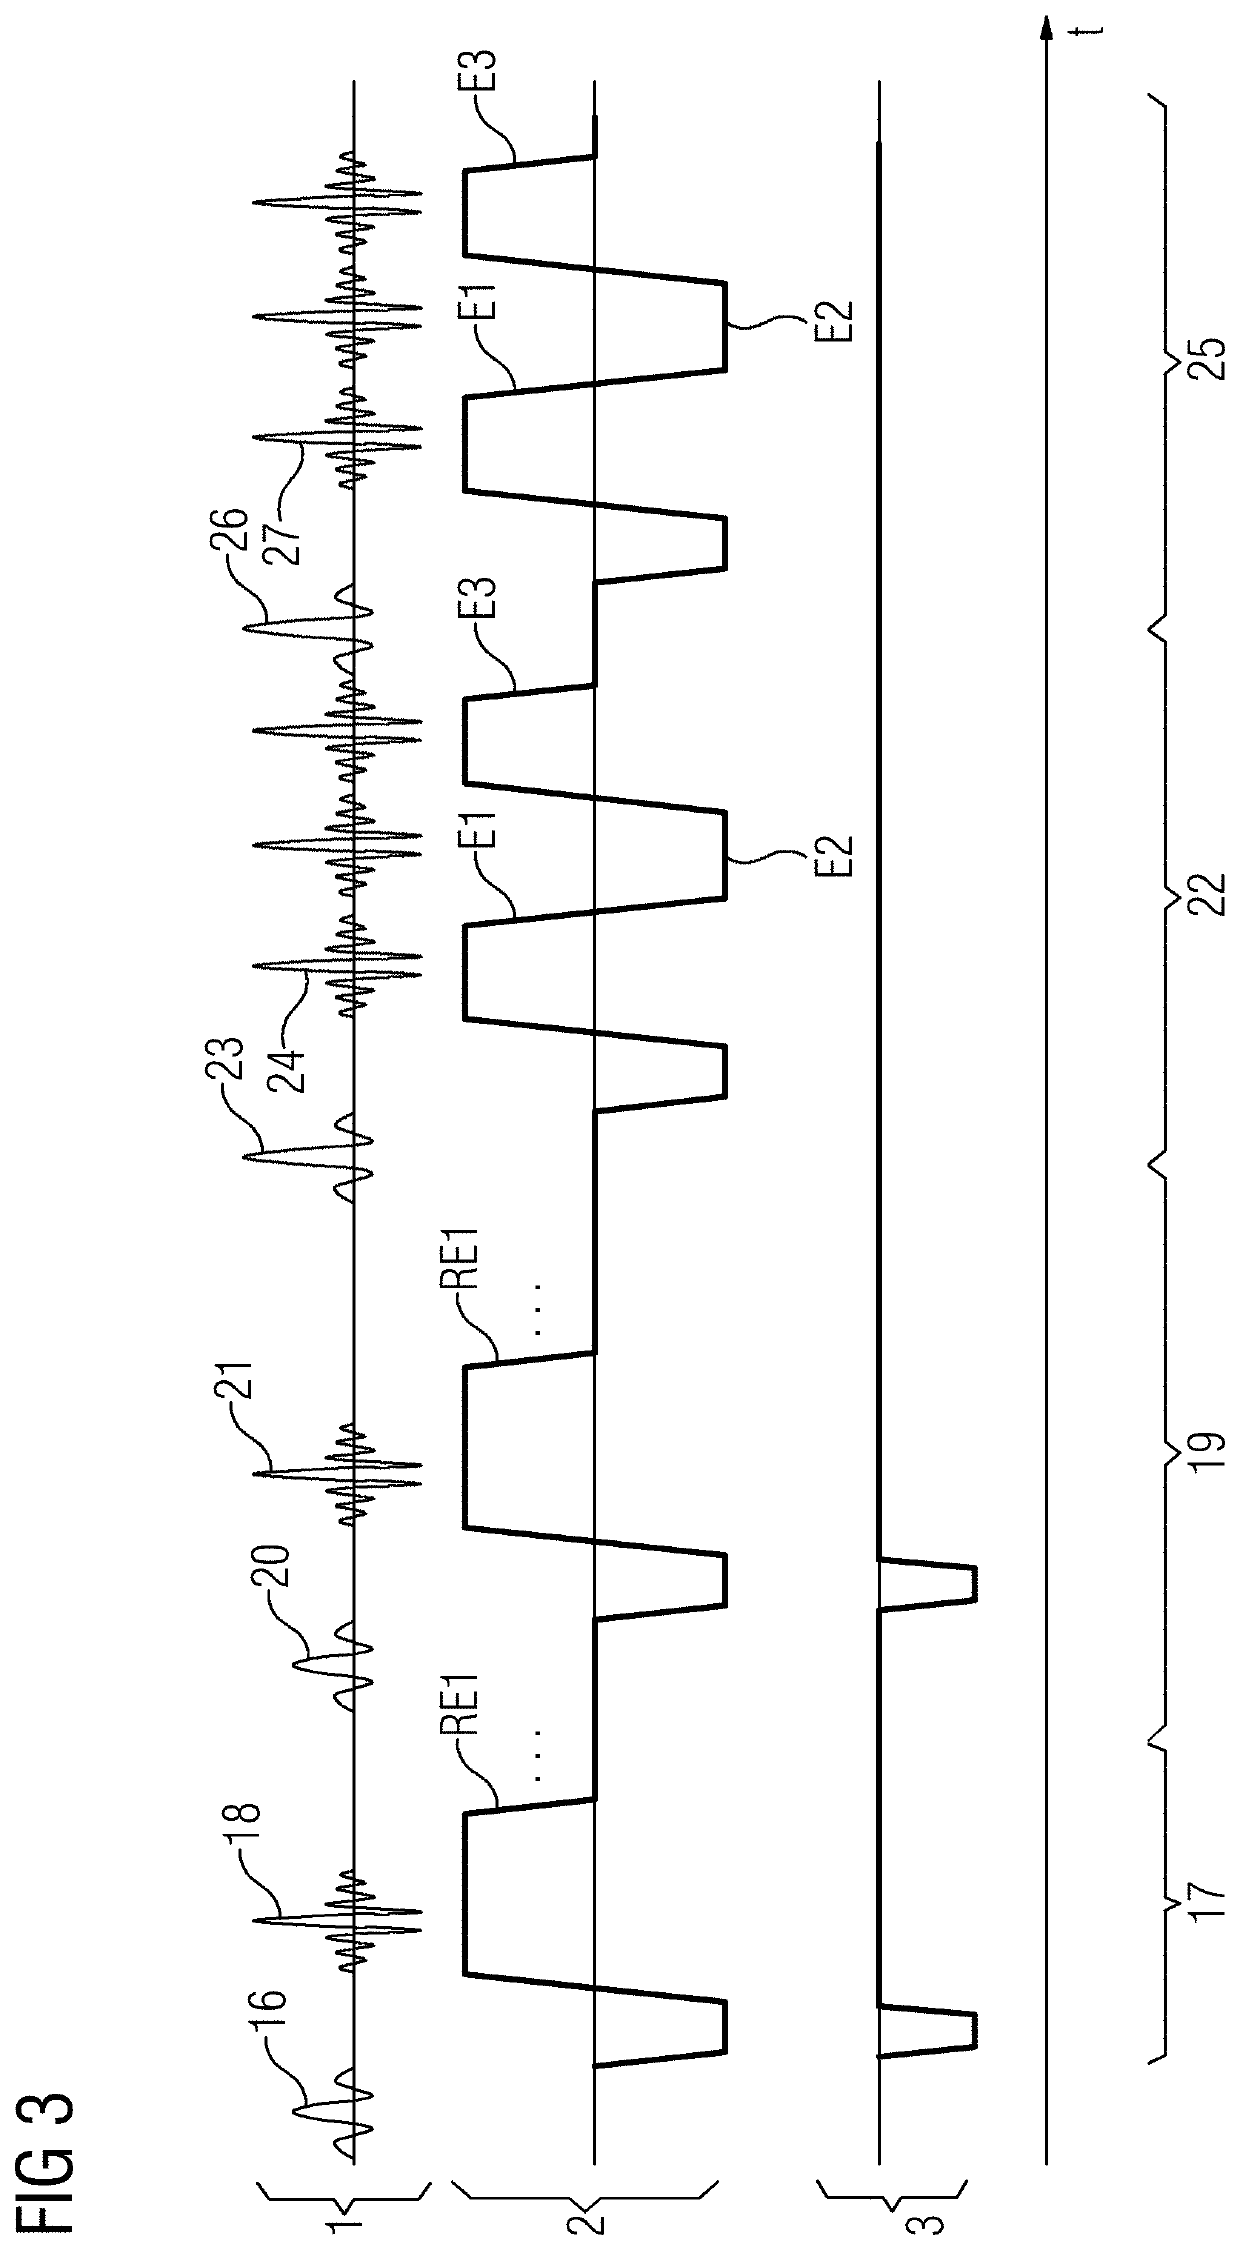 Method and system for creating magnetic resonance images